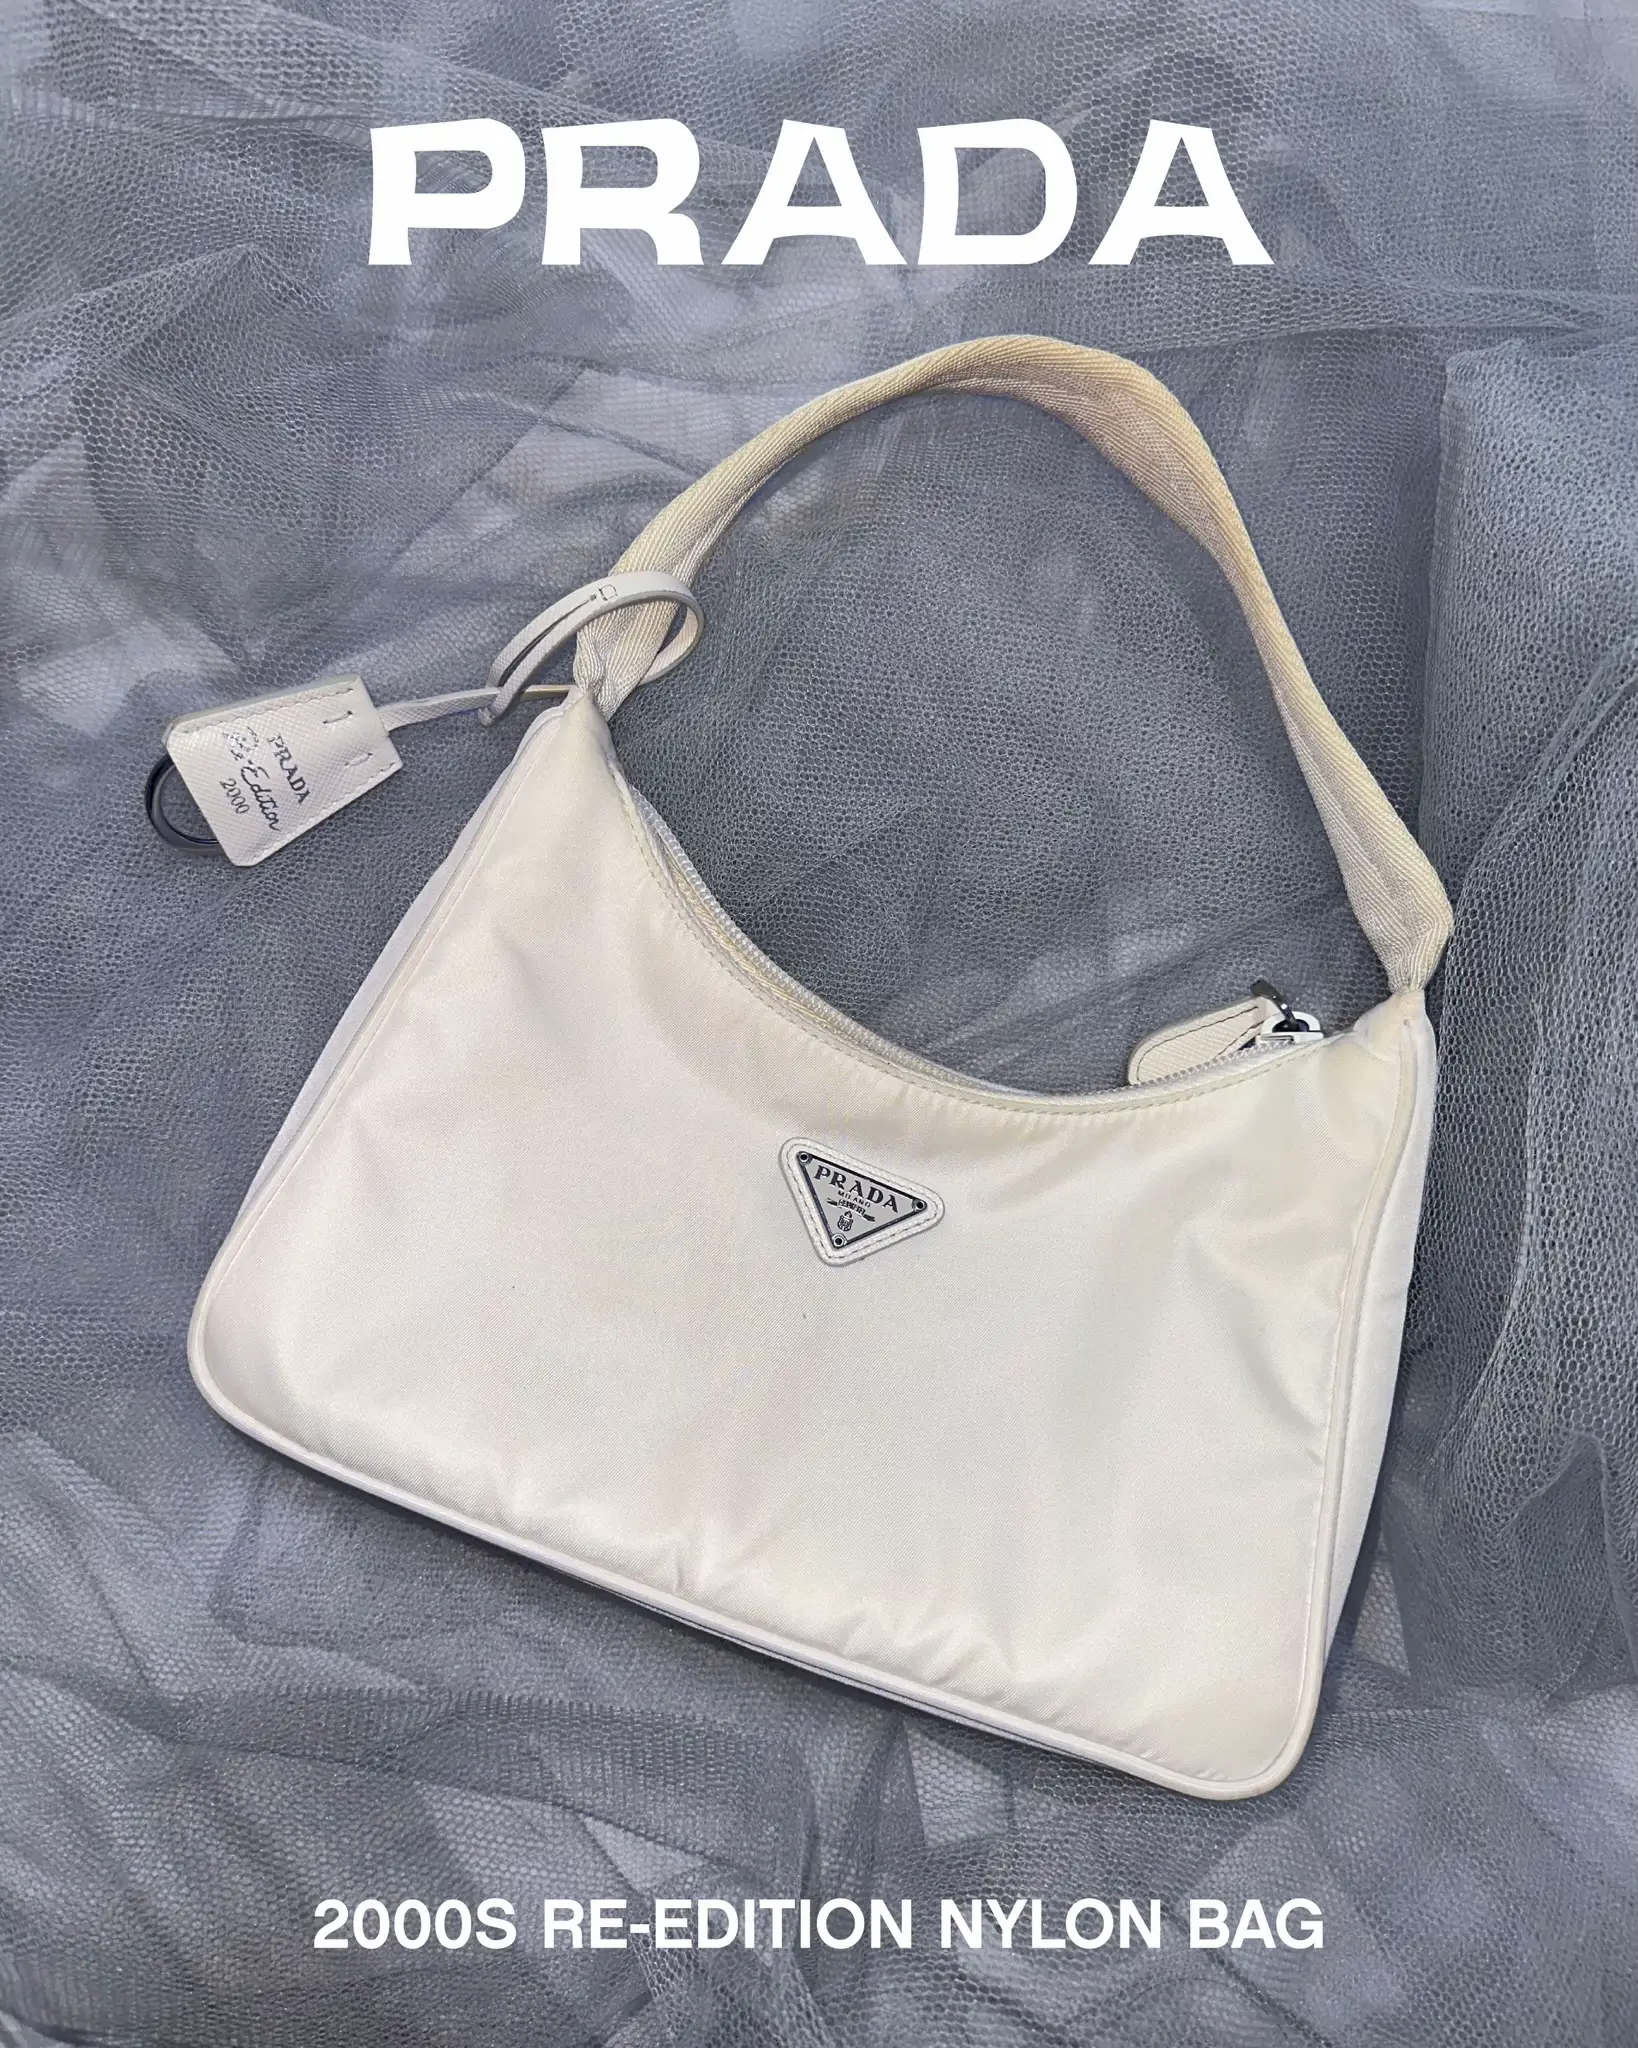 How to Spot Differences on Prada Nylon Re-Edition 2000